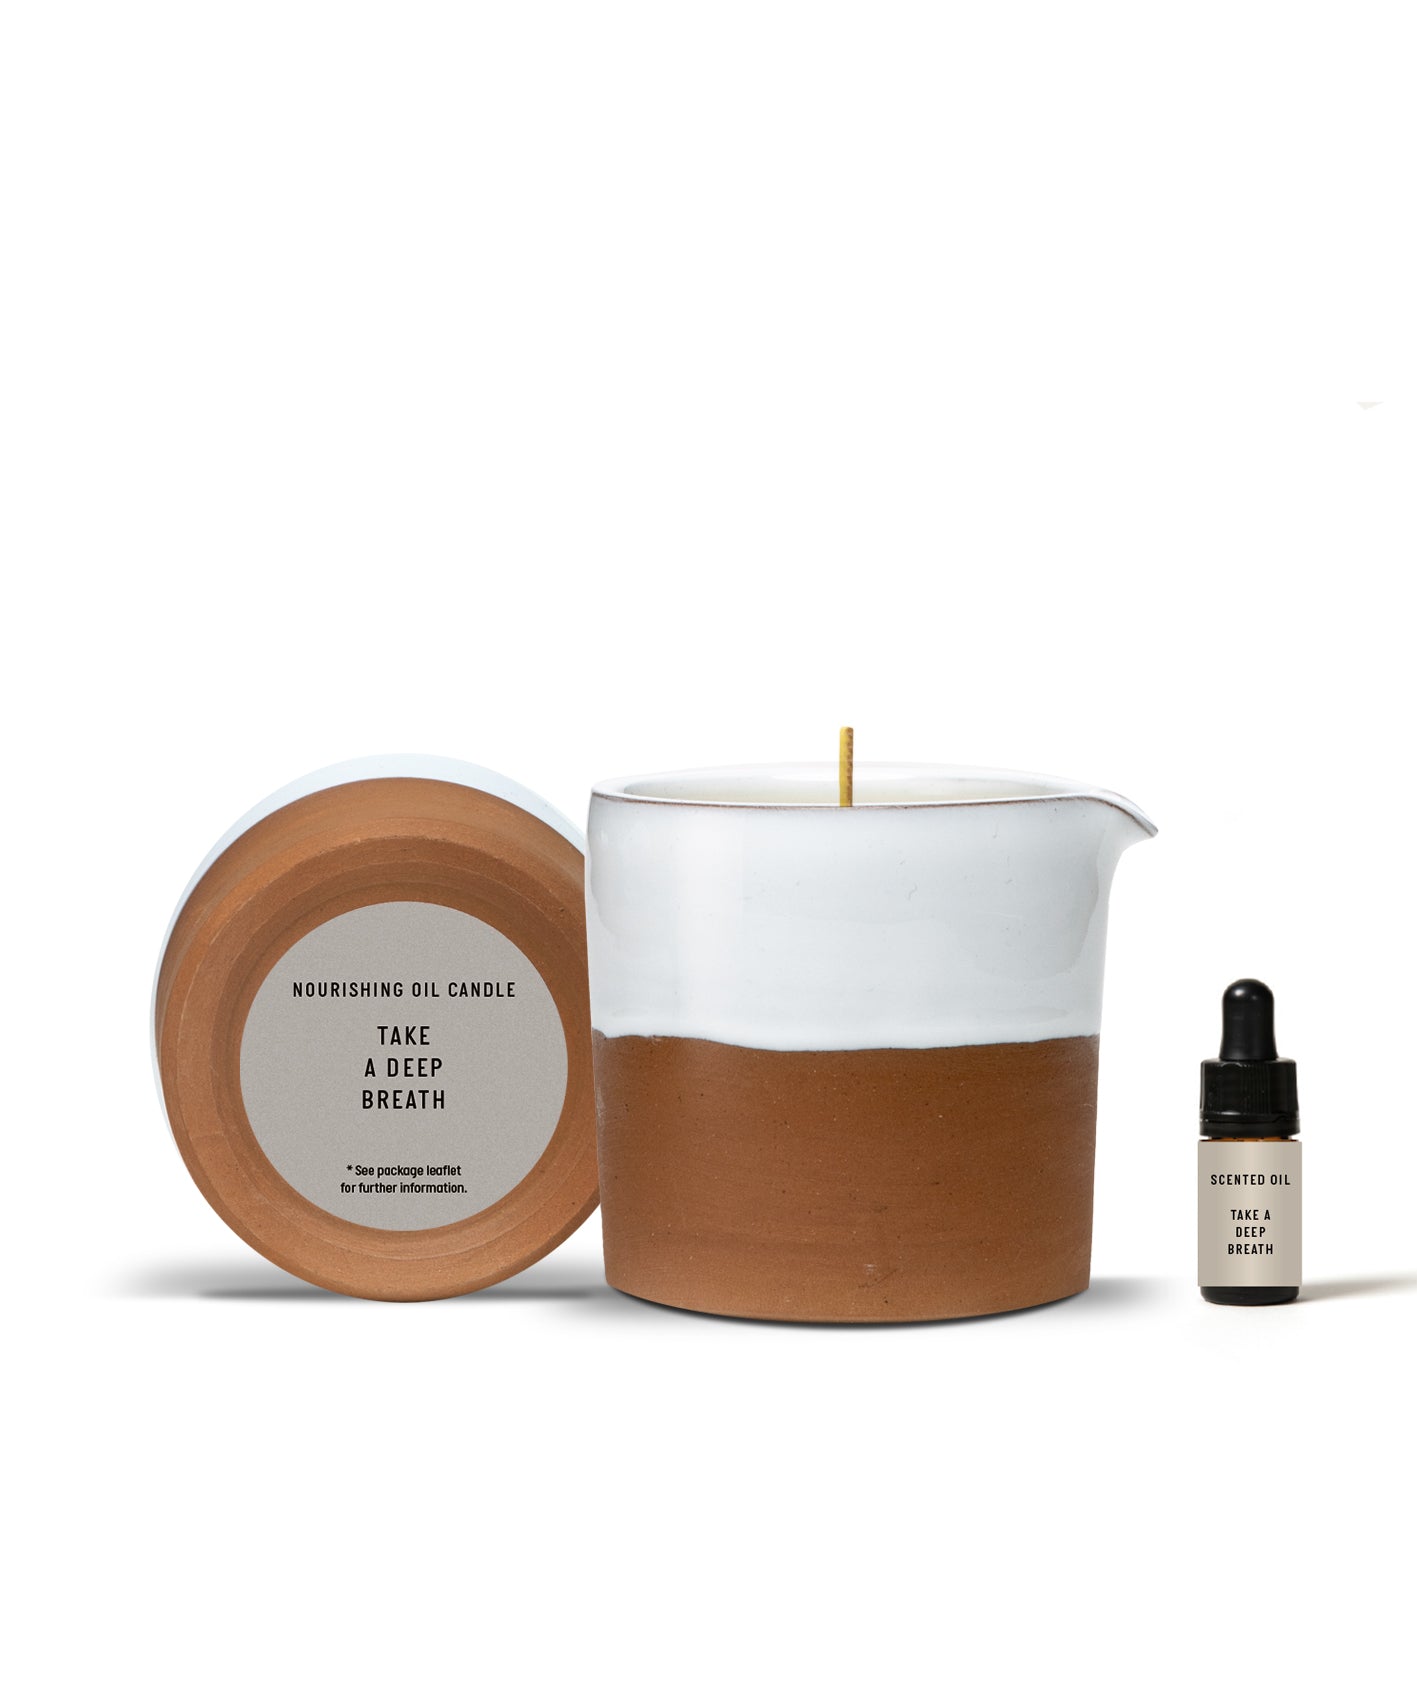 Nourishing Body Oil Candle with/without scent